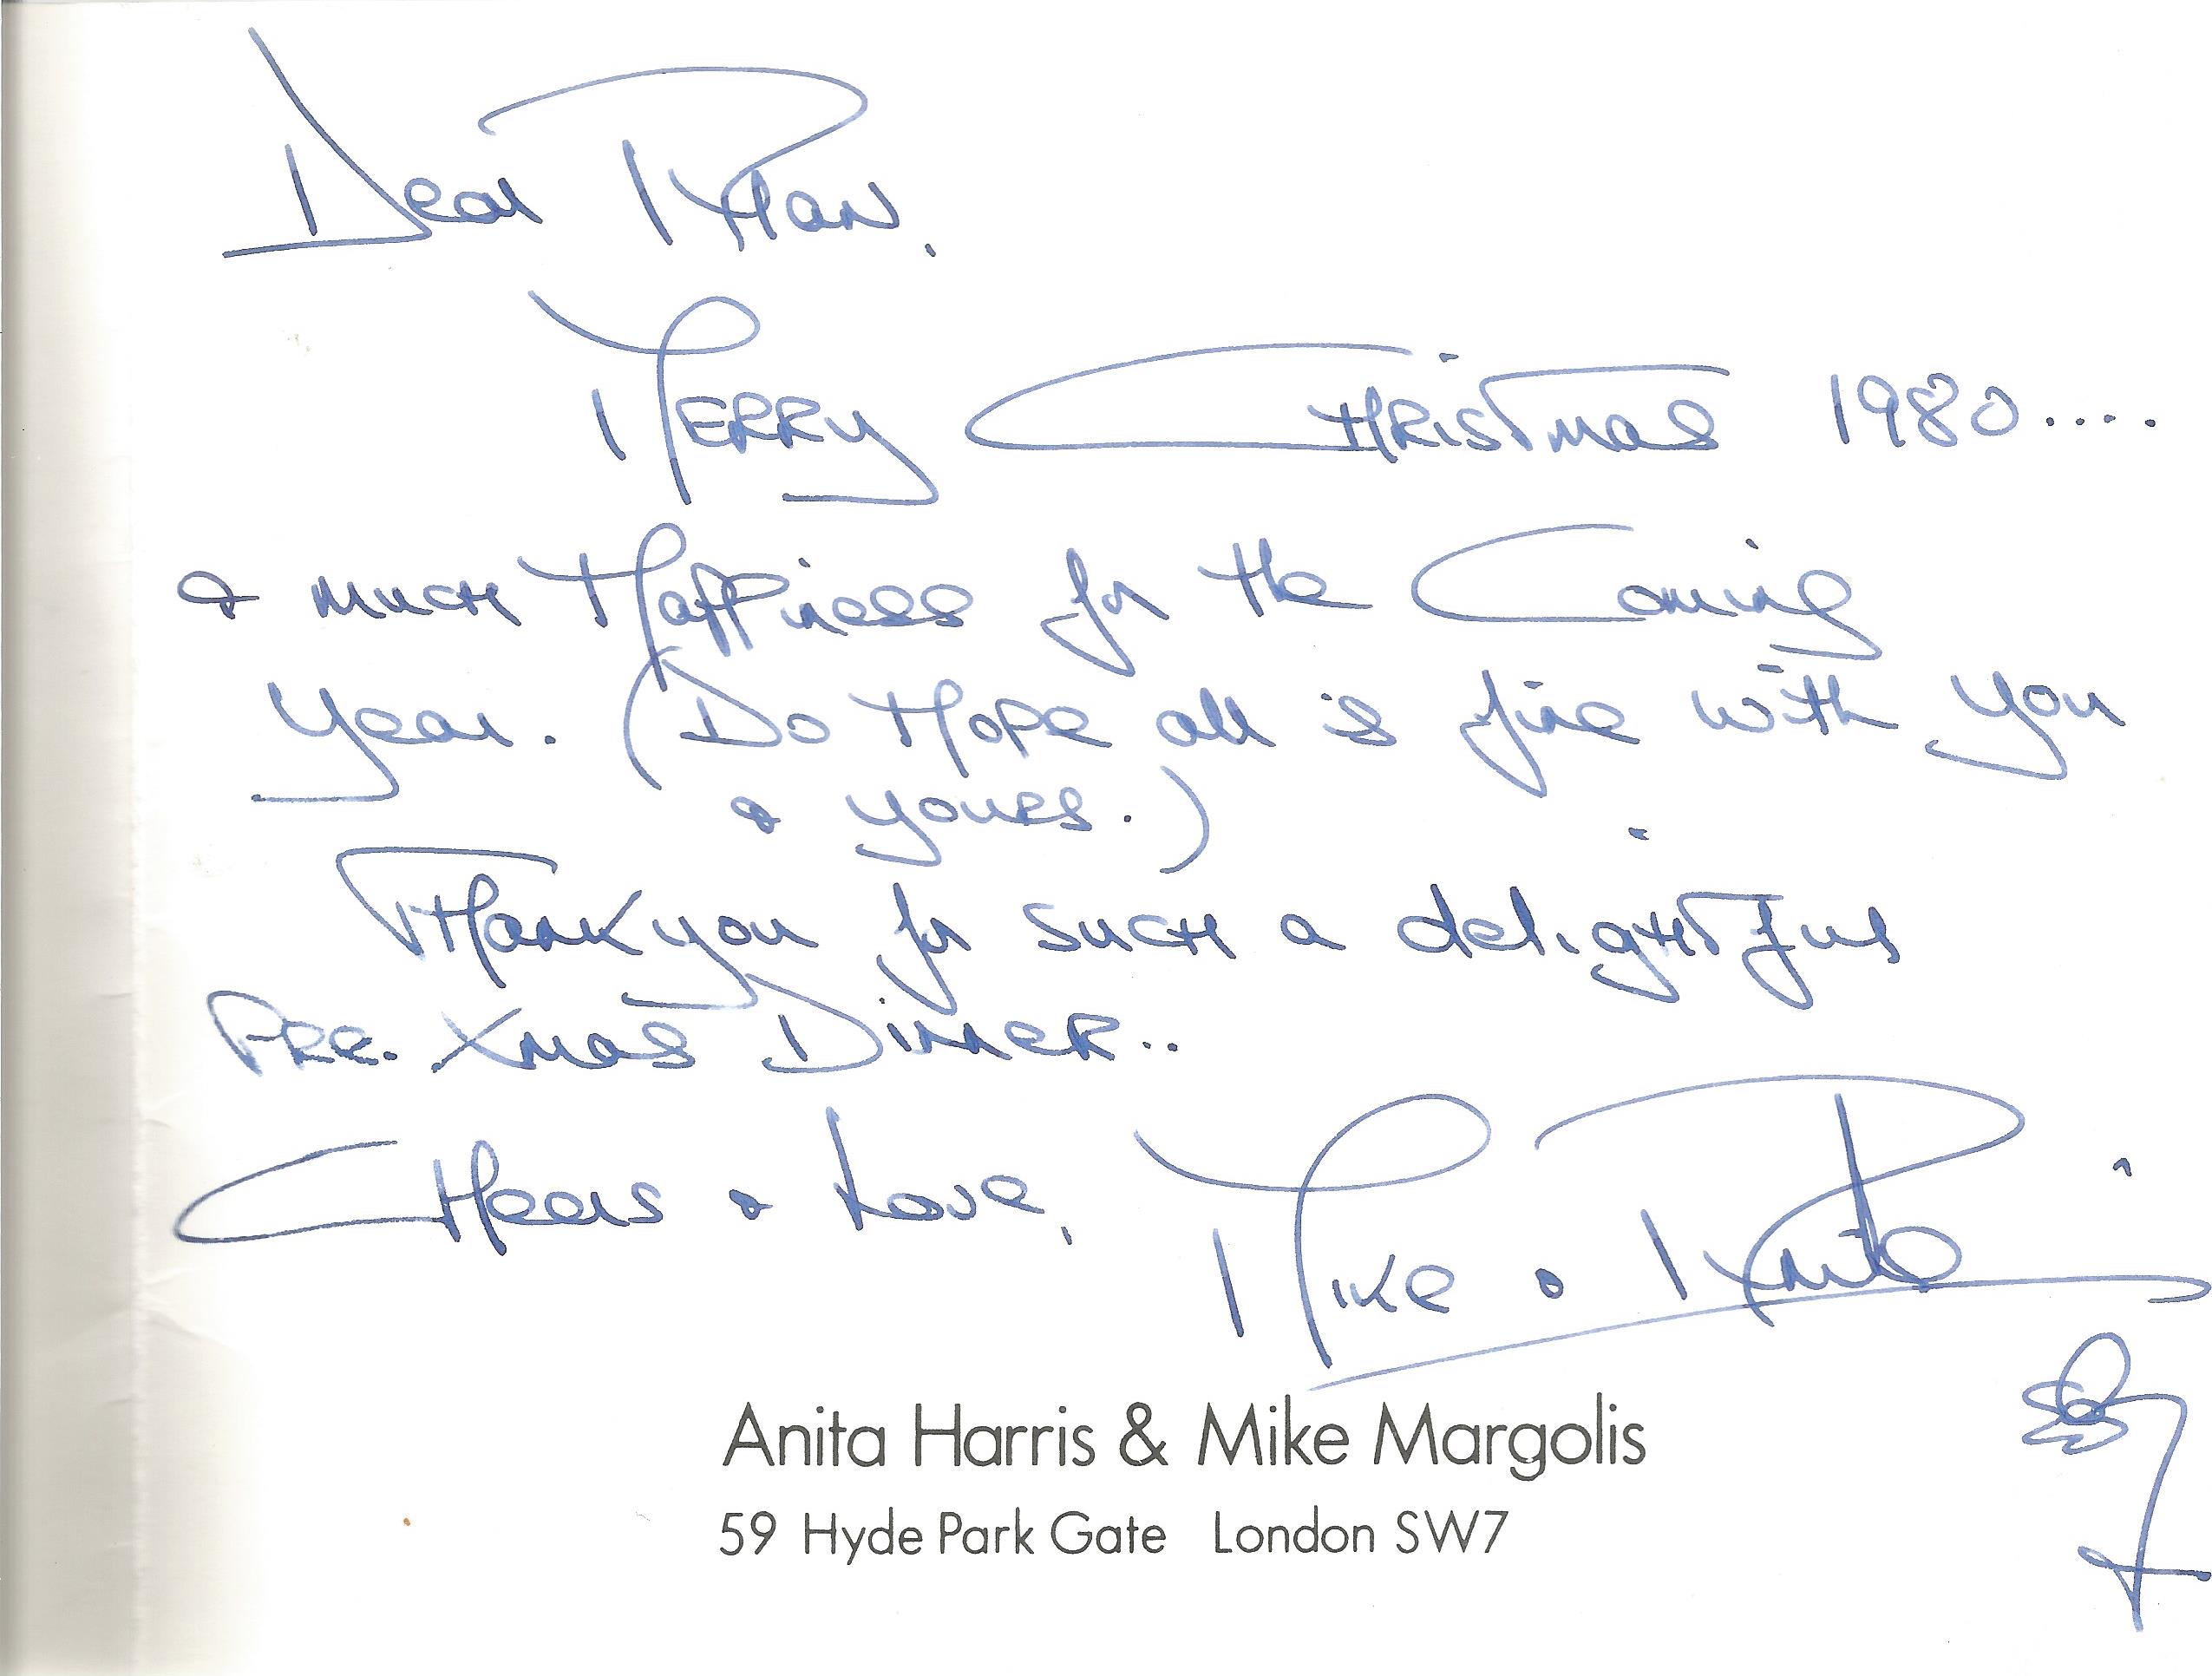 Anita Harris and Mike Margolis Christmas card, inscribed and dated 1980 - Image 2 of 2